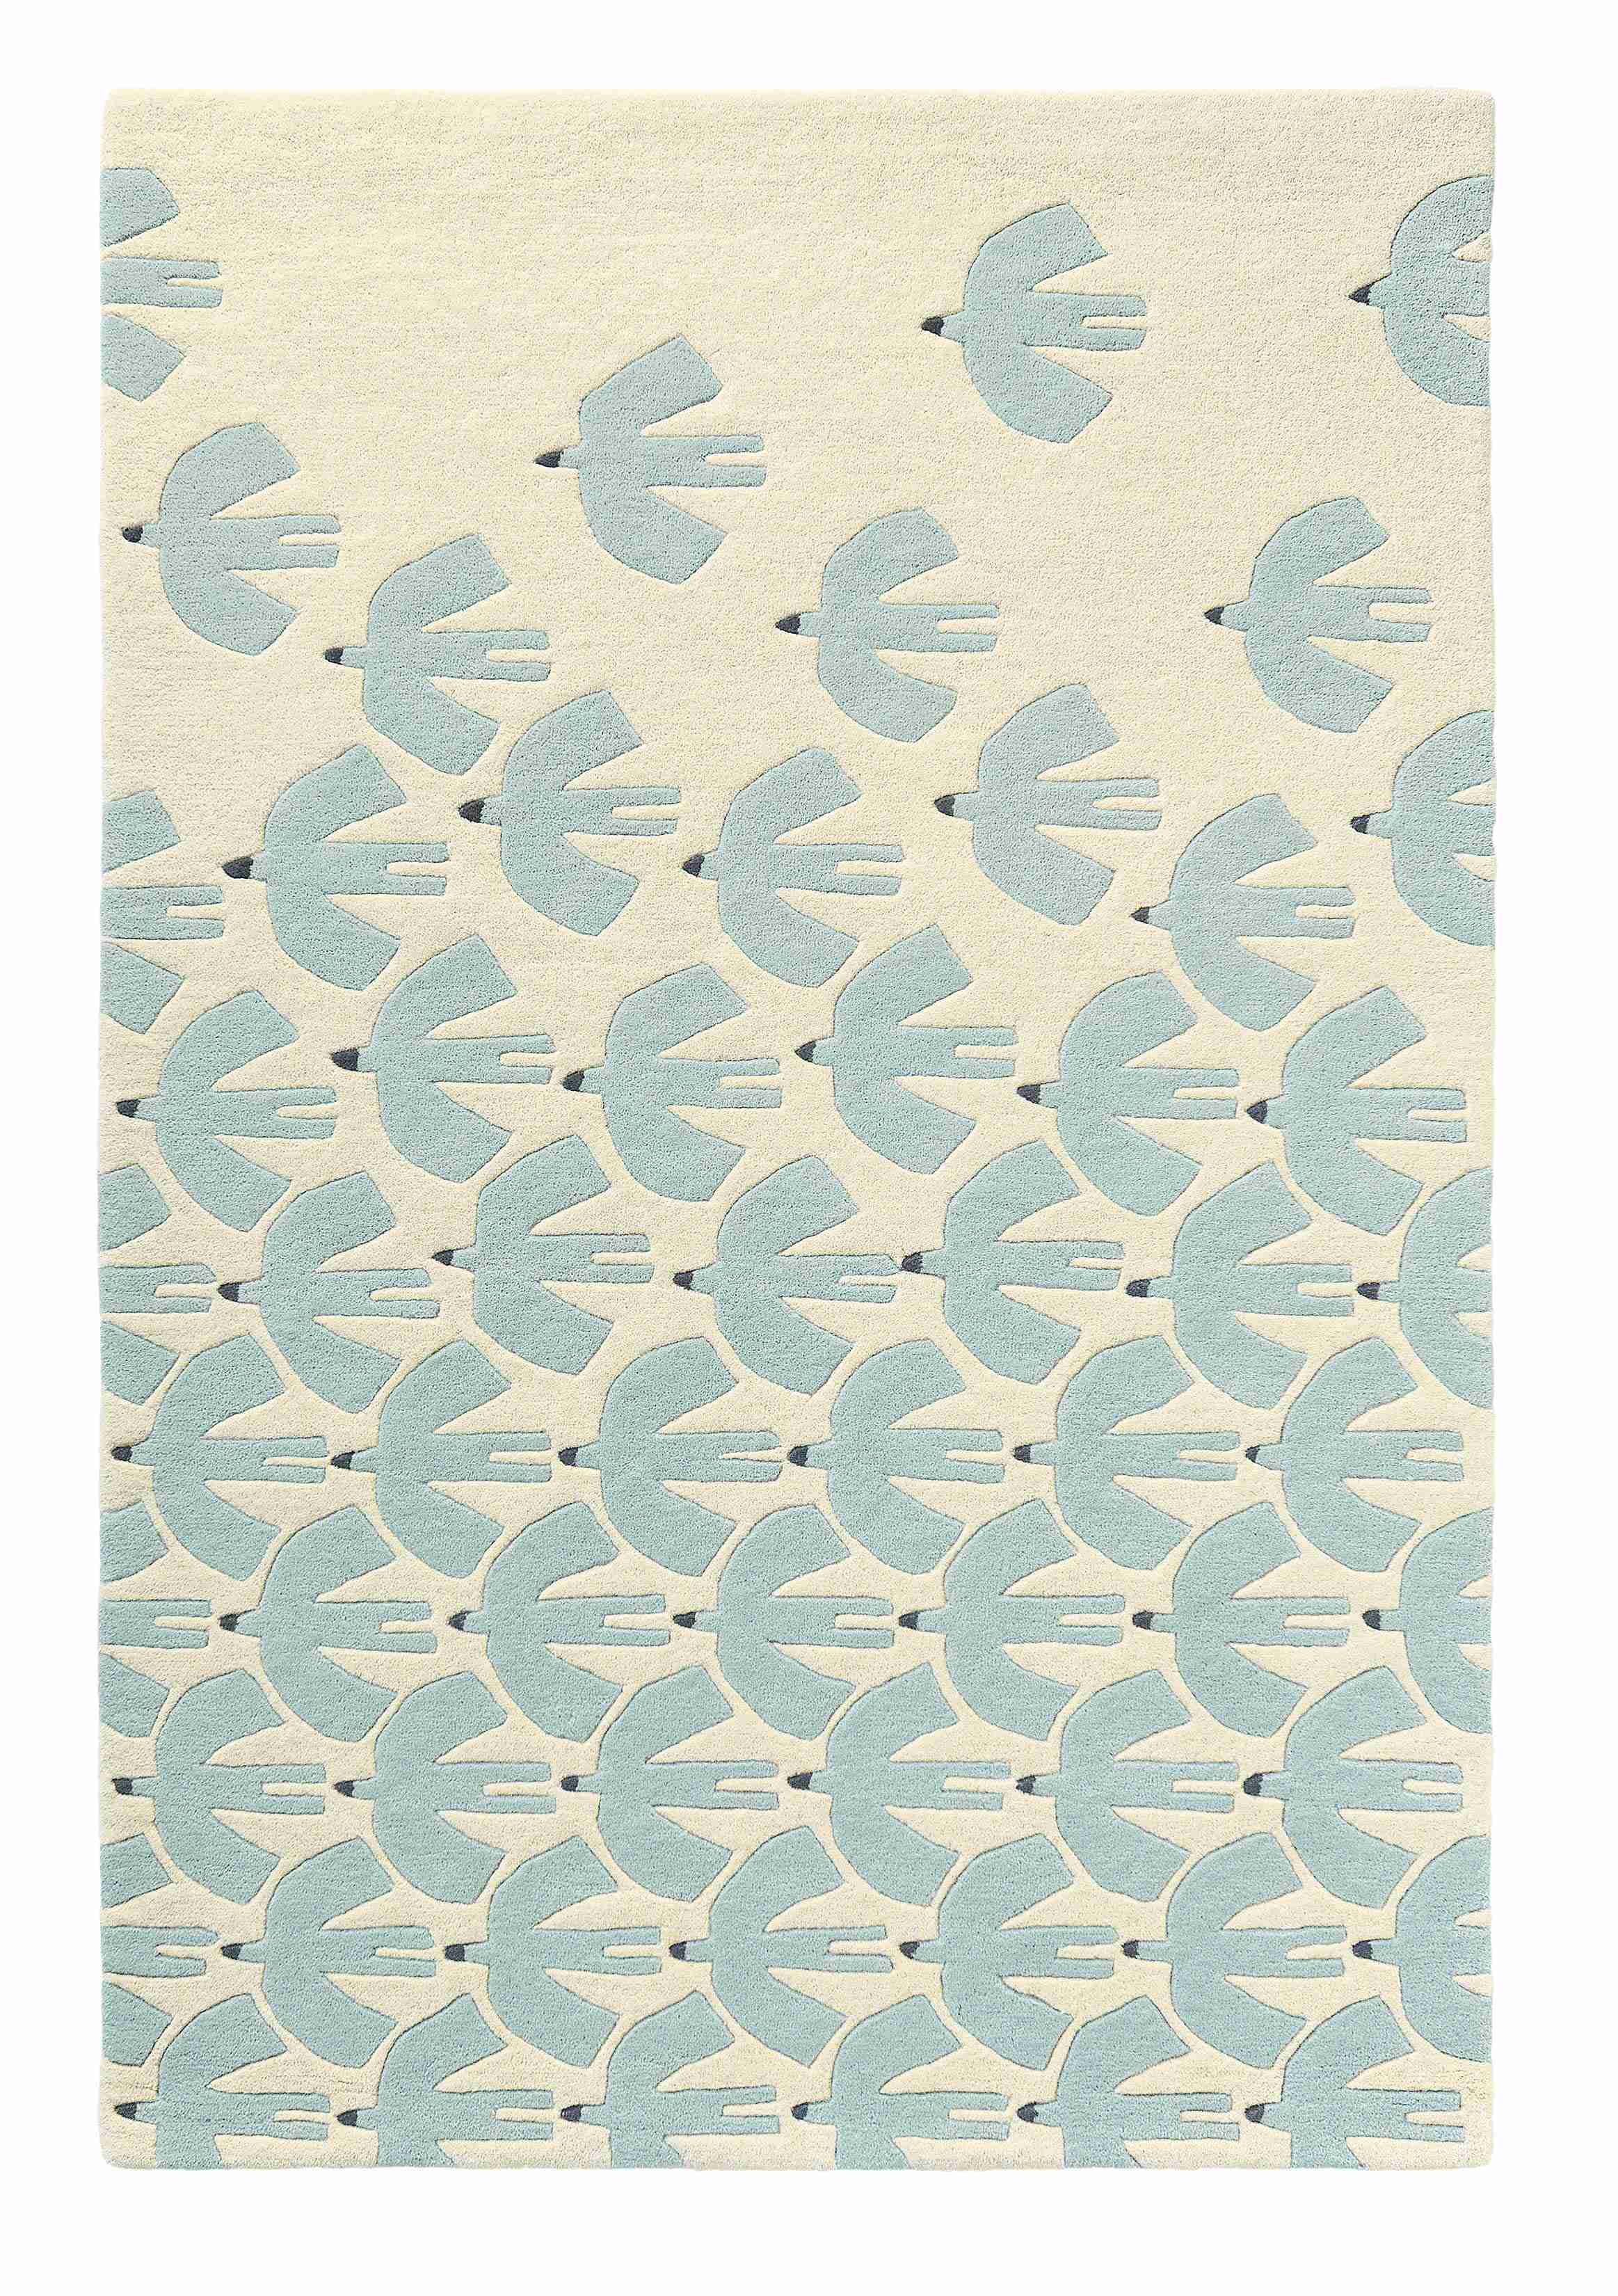 Ivory white rectangular rug decorated with repeating aqua blue flying bird silhouette motif